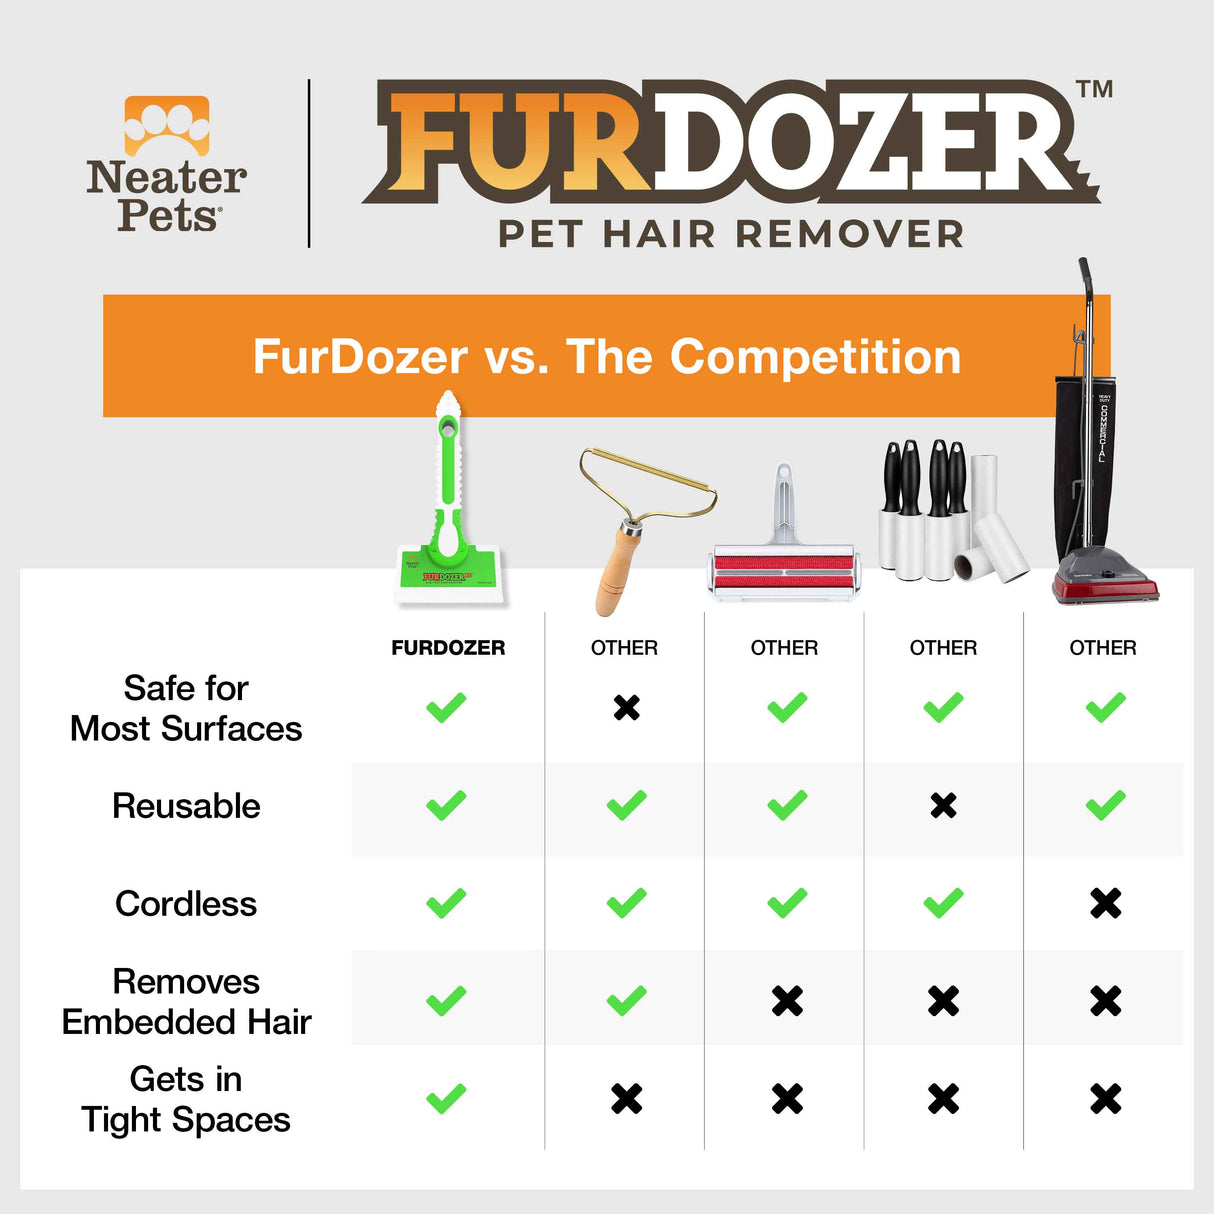 Why the FurDozer is better than the competition